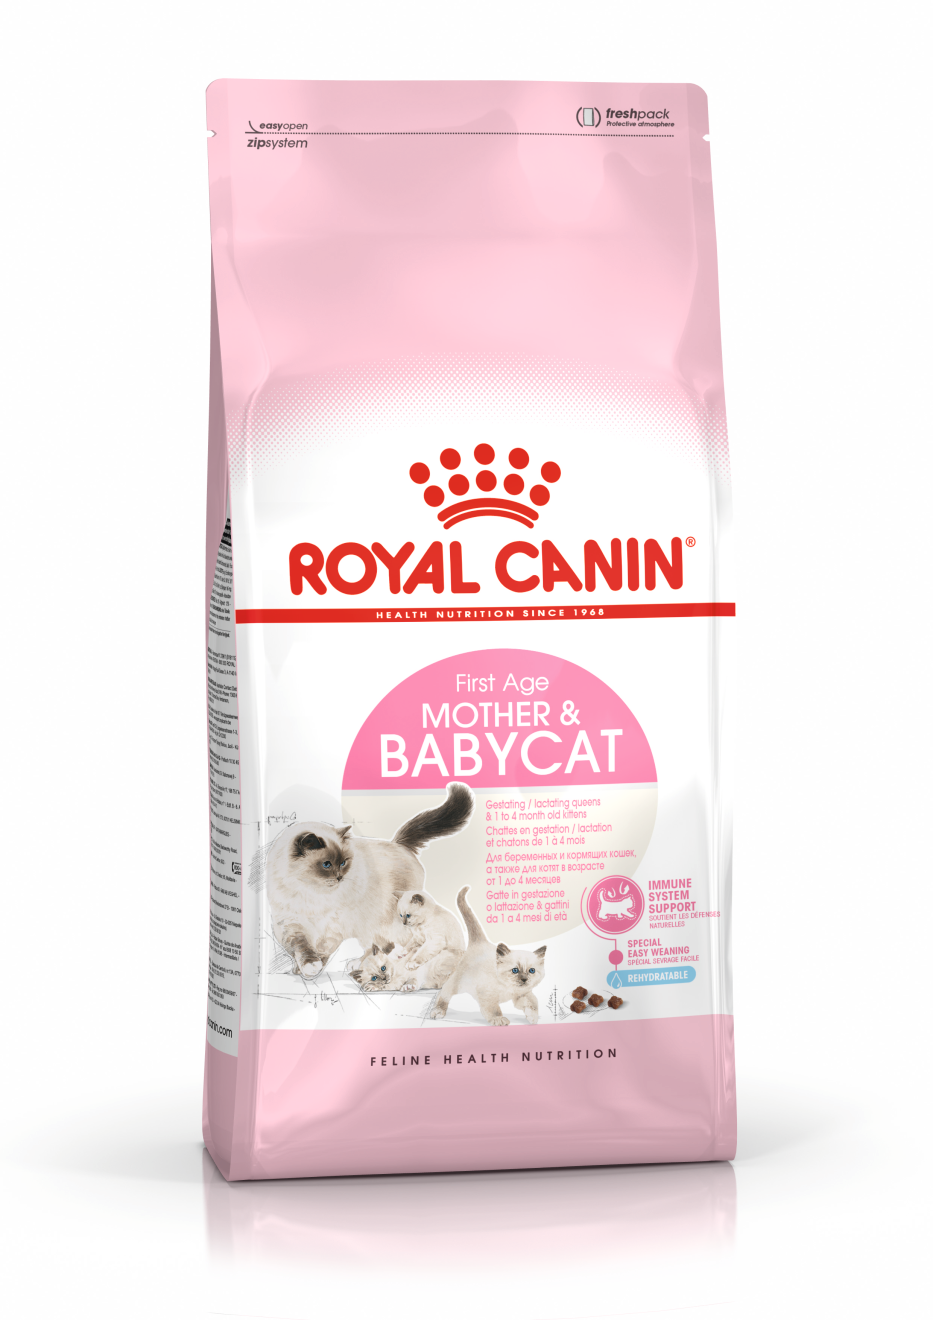 Royal Canin First Age Mother and Baby Cat (3.5lbs bag)